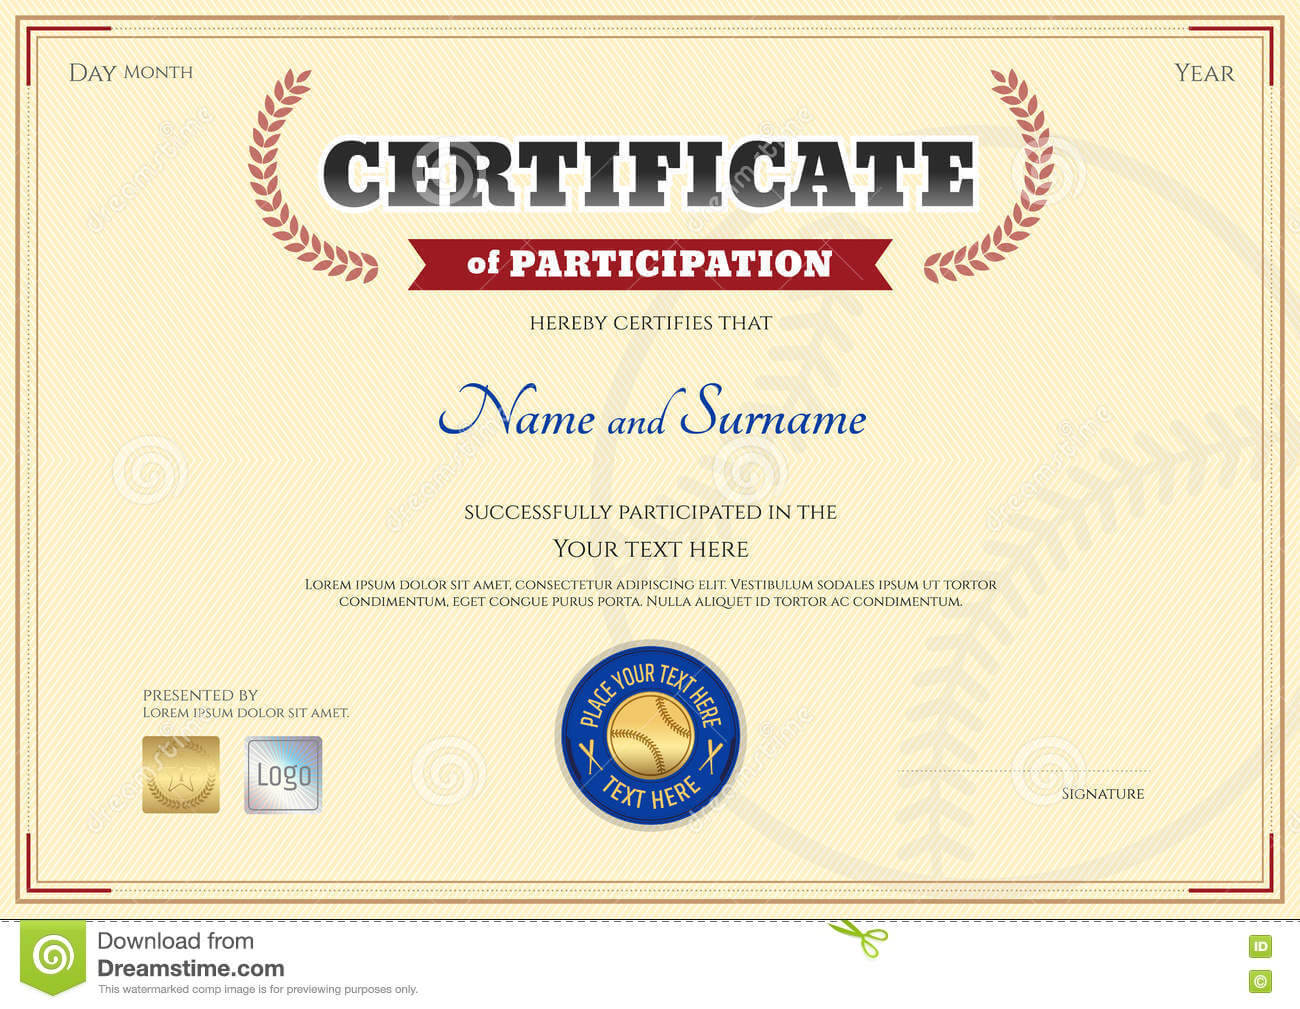 Certificate Of Participation Template In Baseball Sport Regarding Templates For Certificates Of Participation